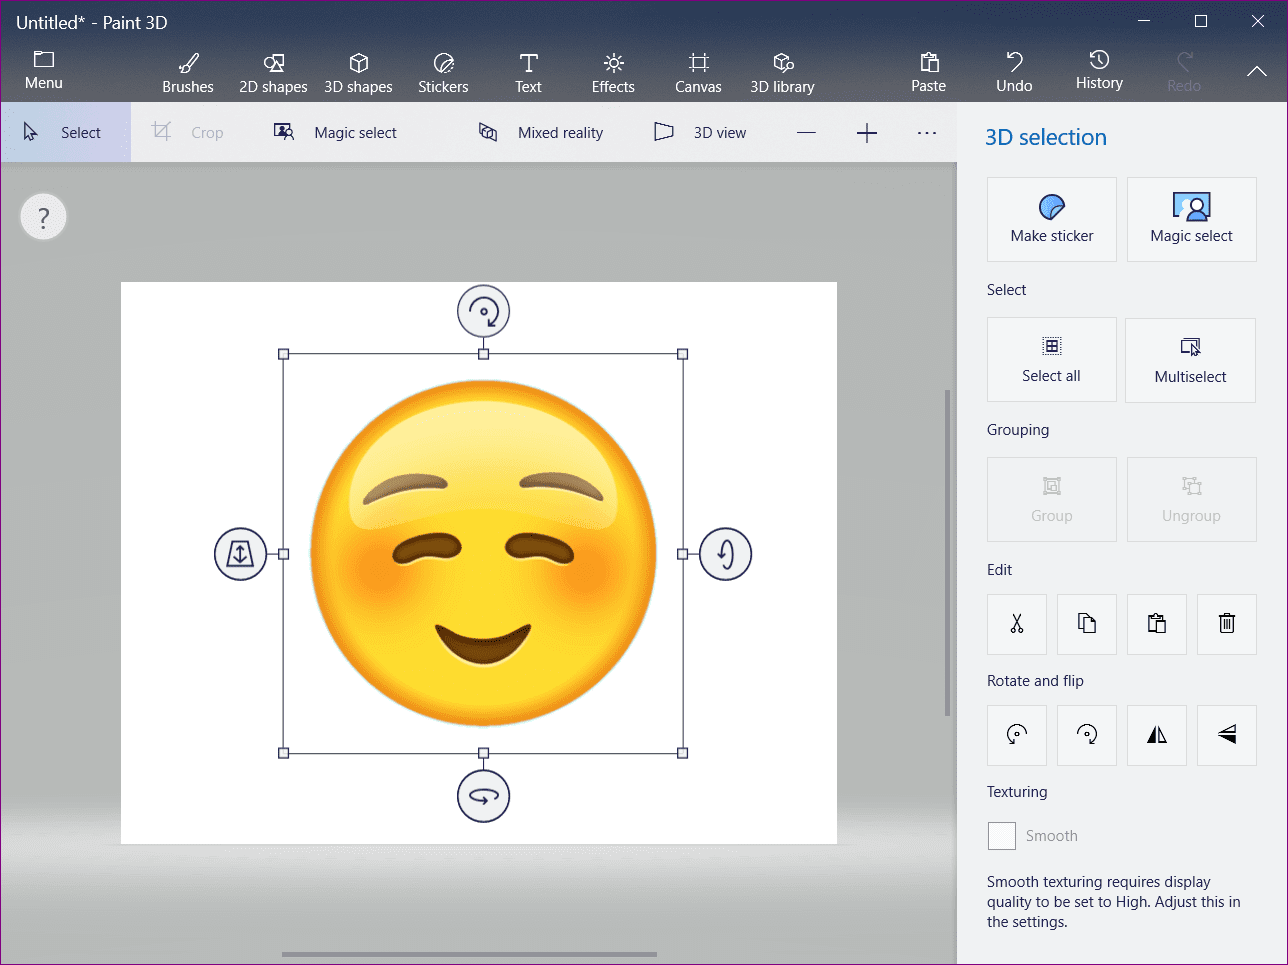 How to Make Background Transparent in Paint 3D